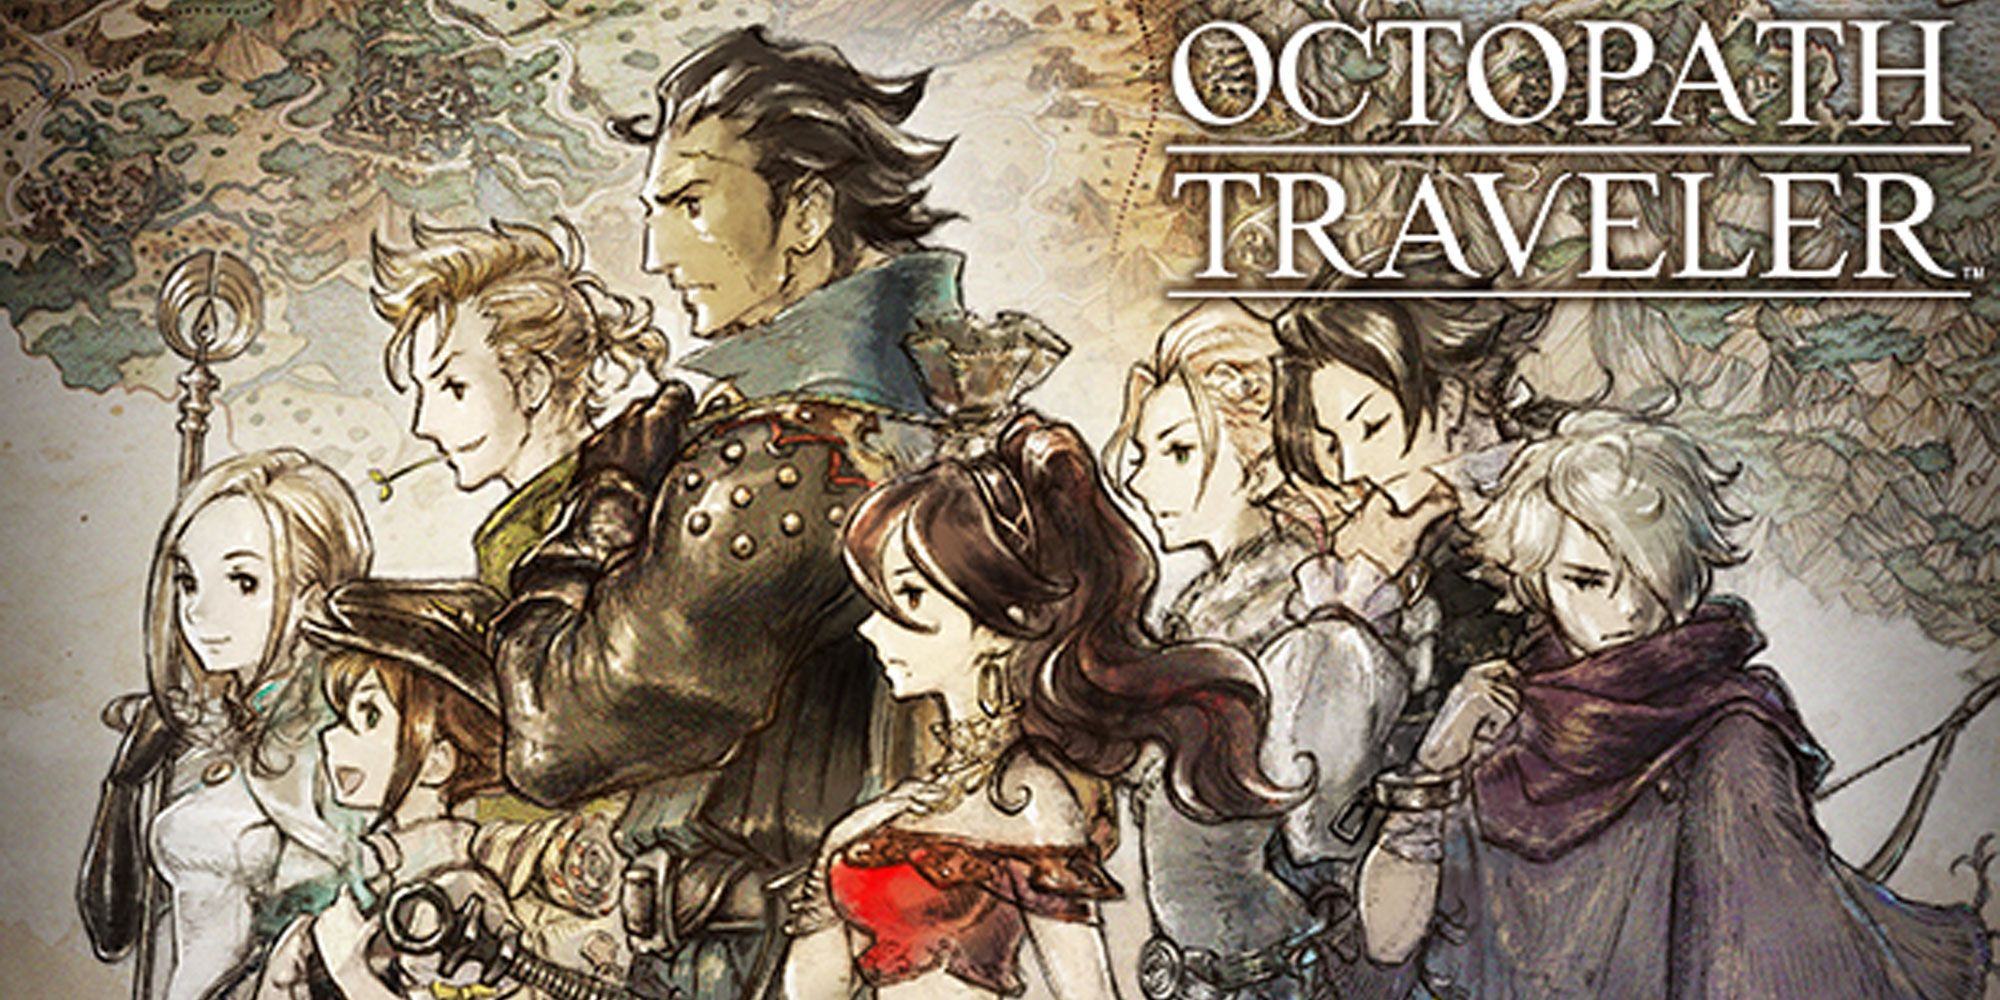 Octopath Traveler's cover art features eight main characters under the game's stylized title.